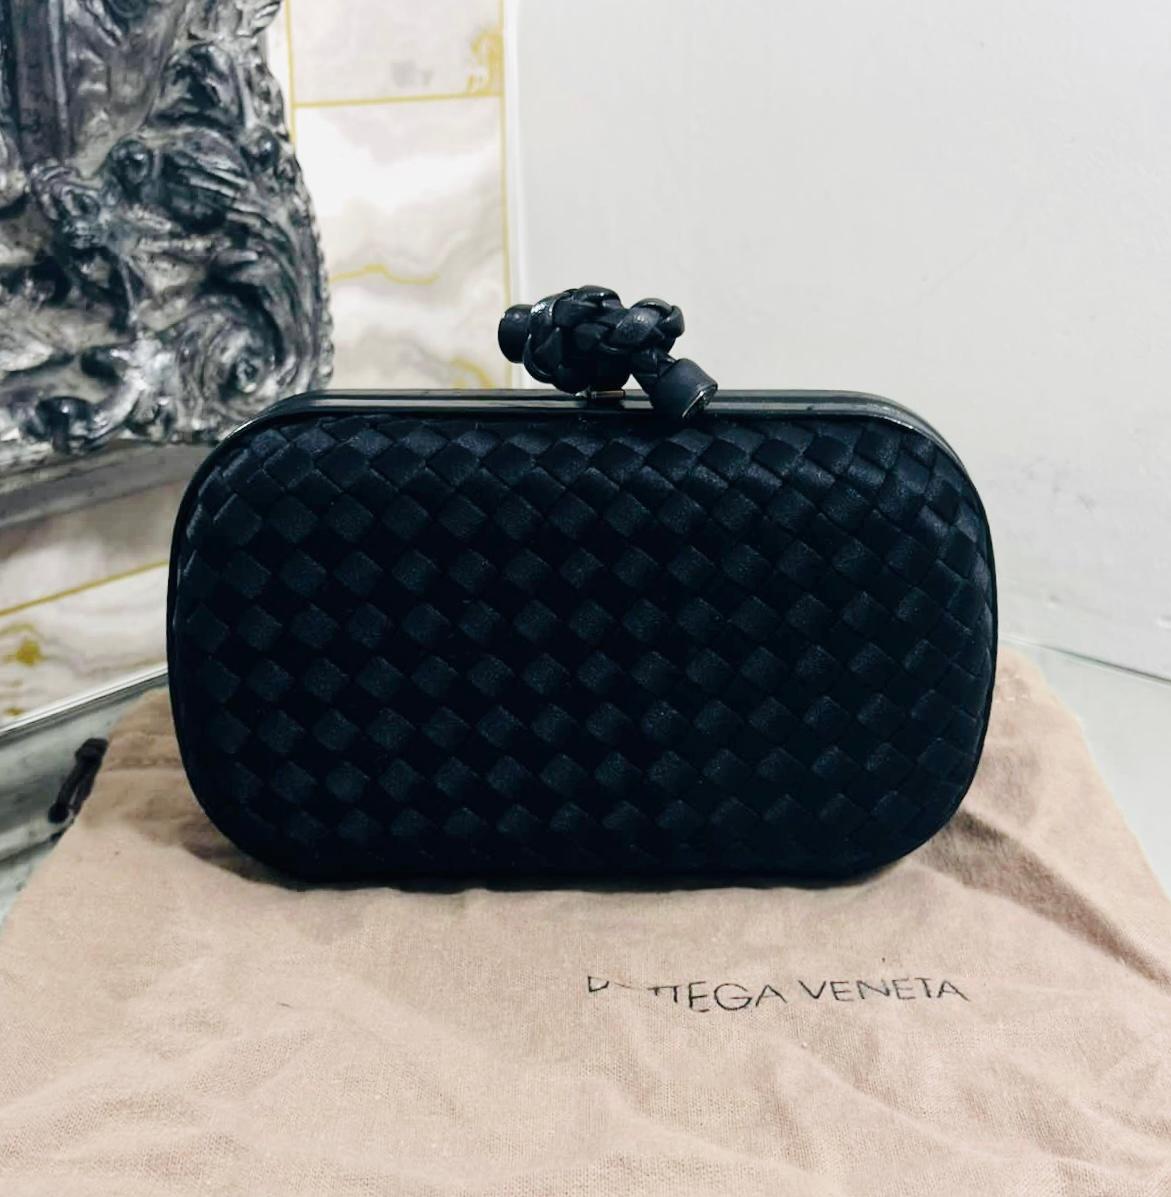 Bottega Veneta Silk Top Knot Clutch Bag

Black bag designed with the brand's signature Intrecciato weave.

Features black palladium knot twisted closure.

Size – Height 10cm, Width 17cm, Depth 5cm

Condition – Good (Signs of wear to the interior,